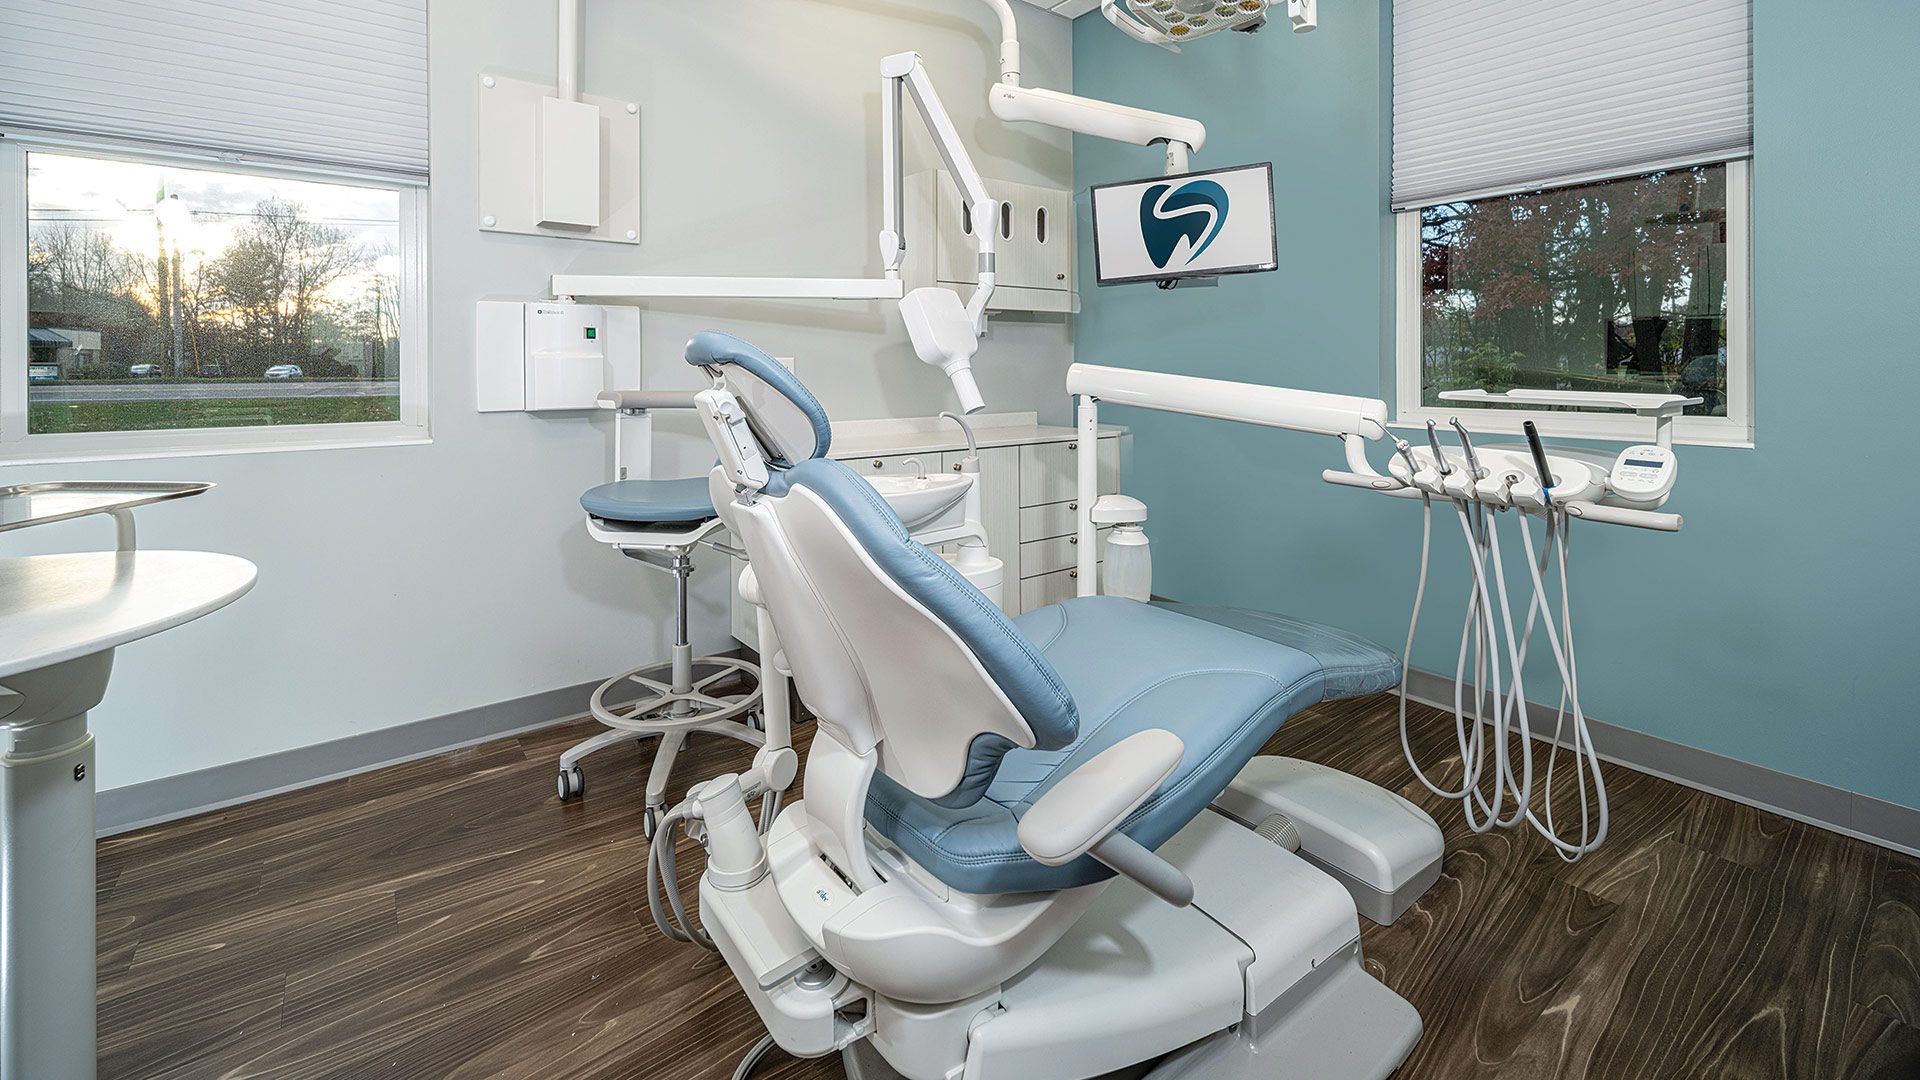 Sweitzer Construction has developed an expertise in dental-office construction